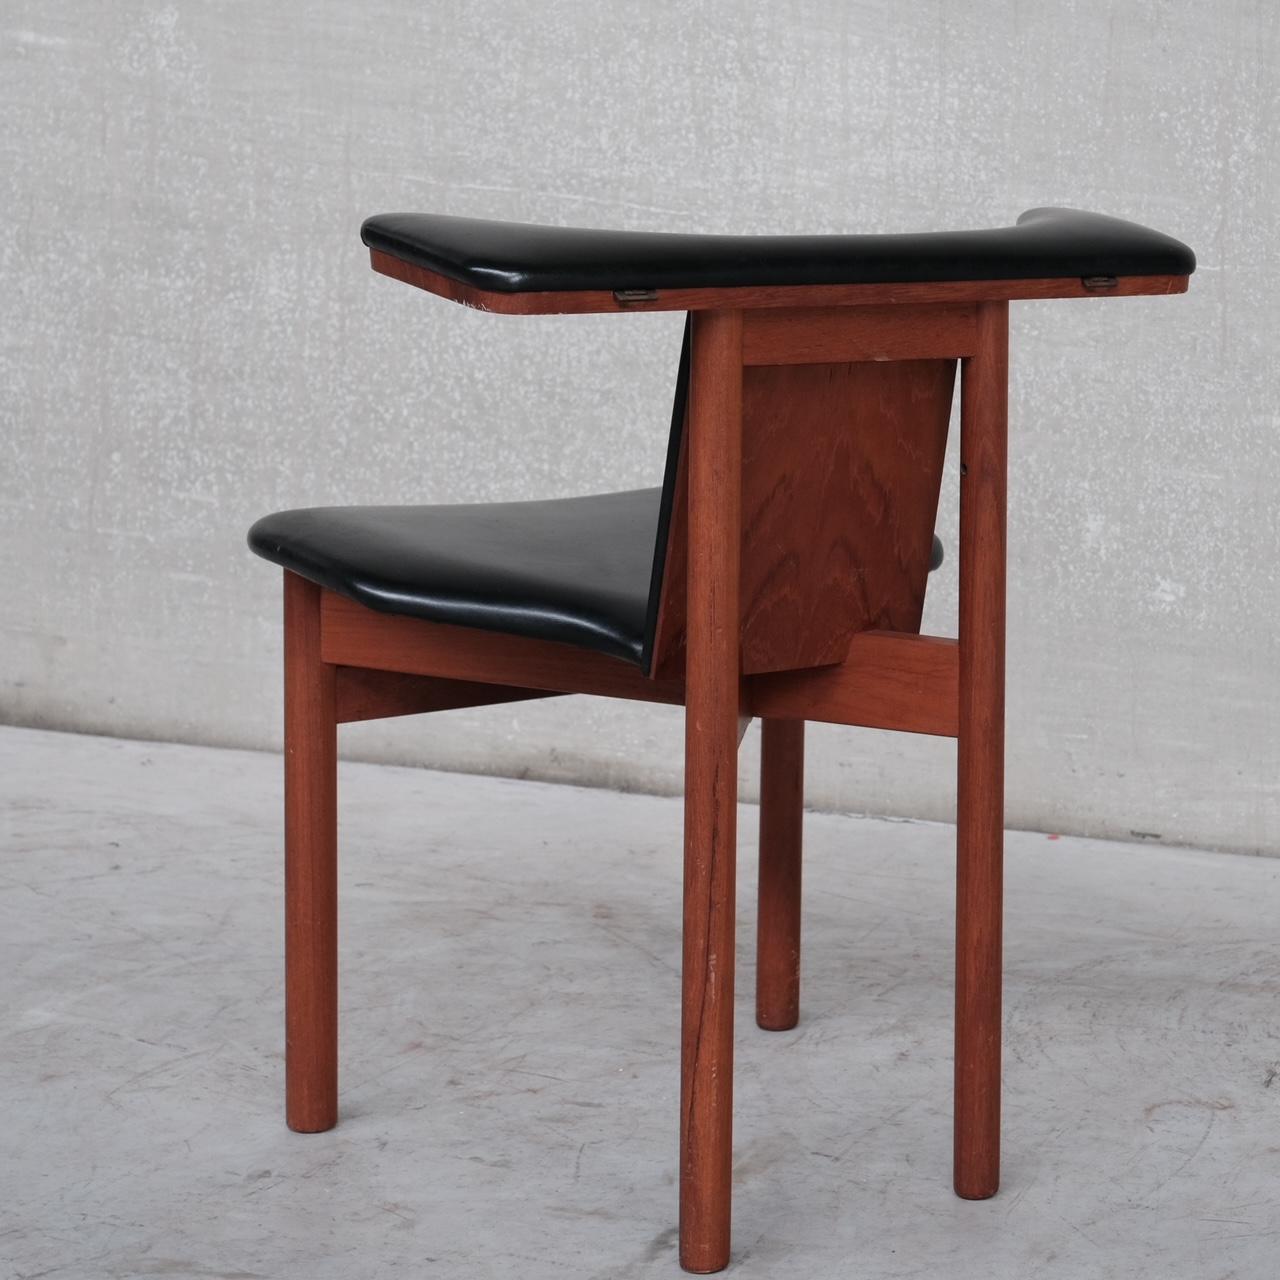 Teak and Leatherette Scandinavian Mid-Century Desk Chair In Good Condition For Sale In London, GB